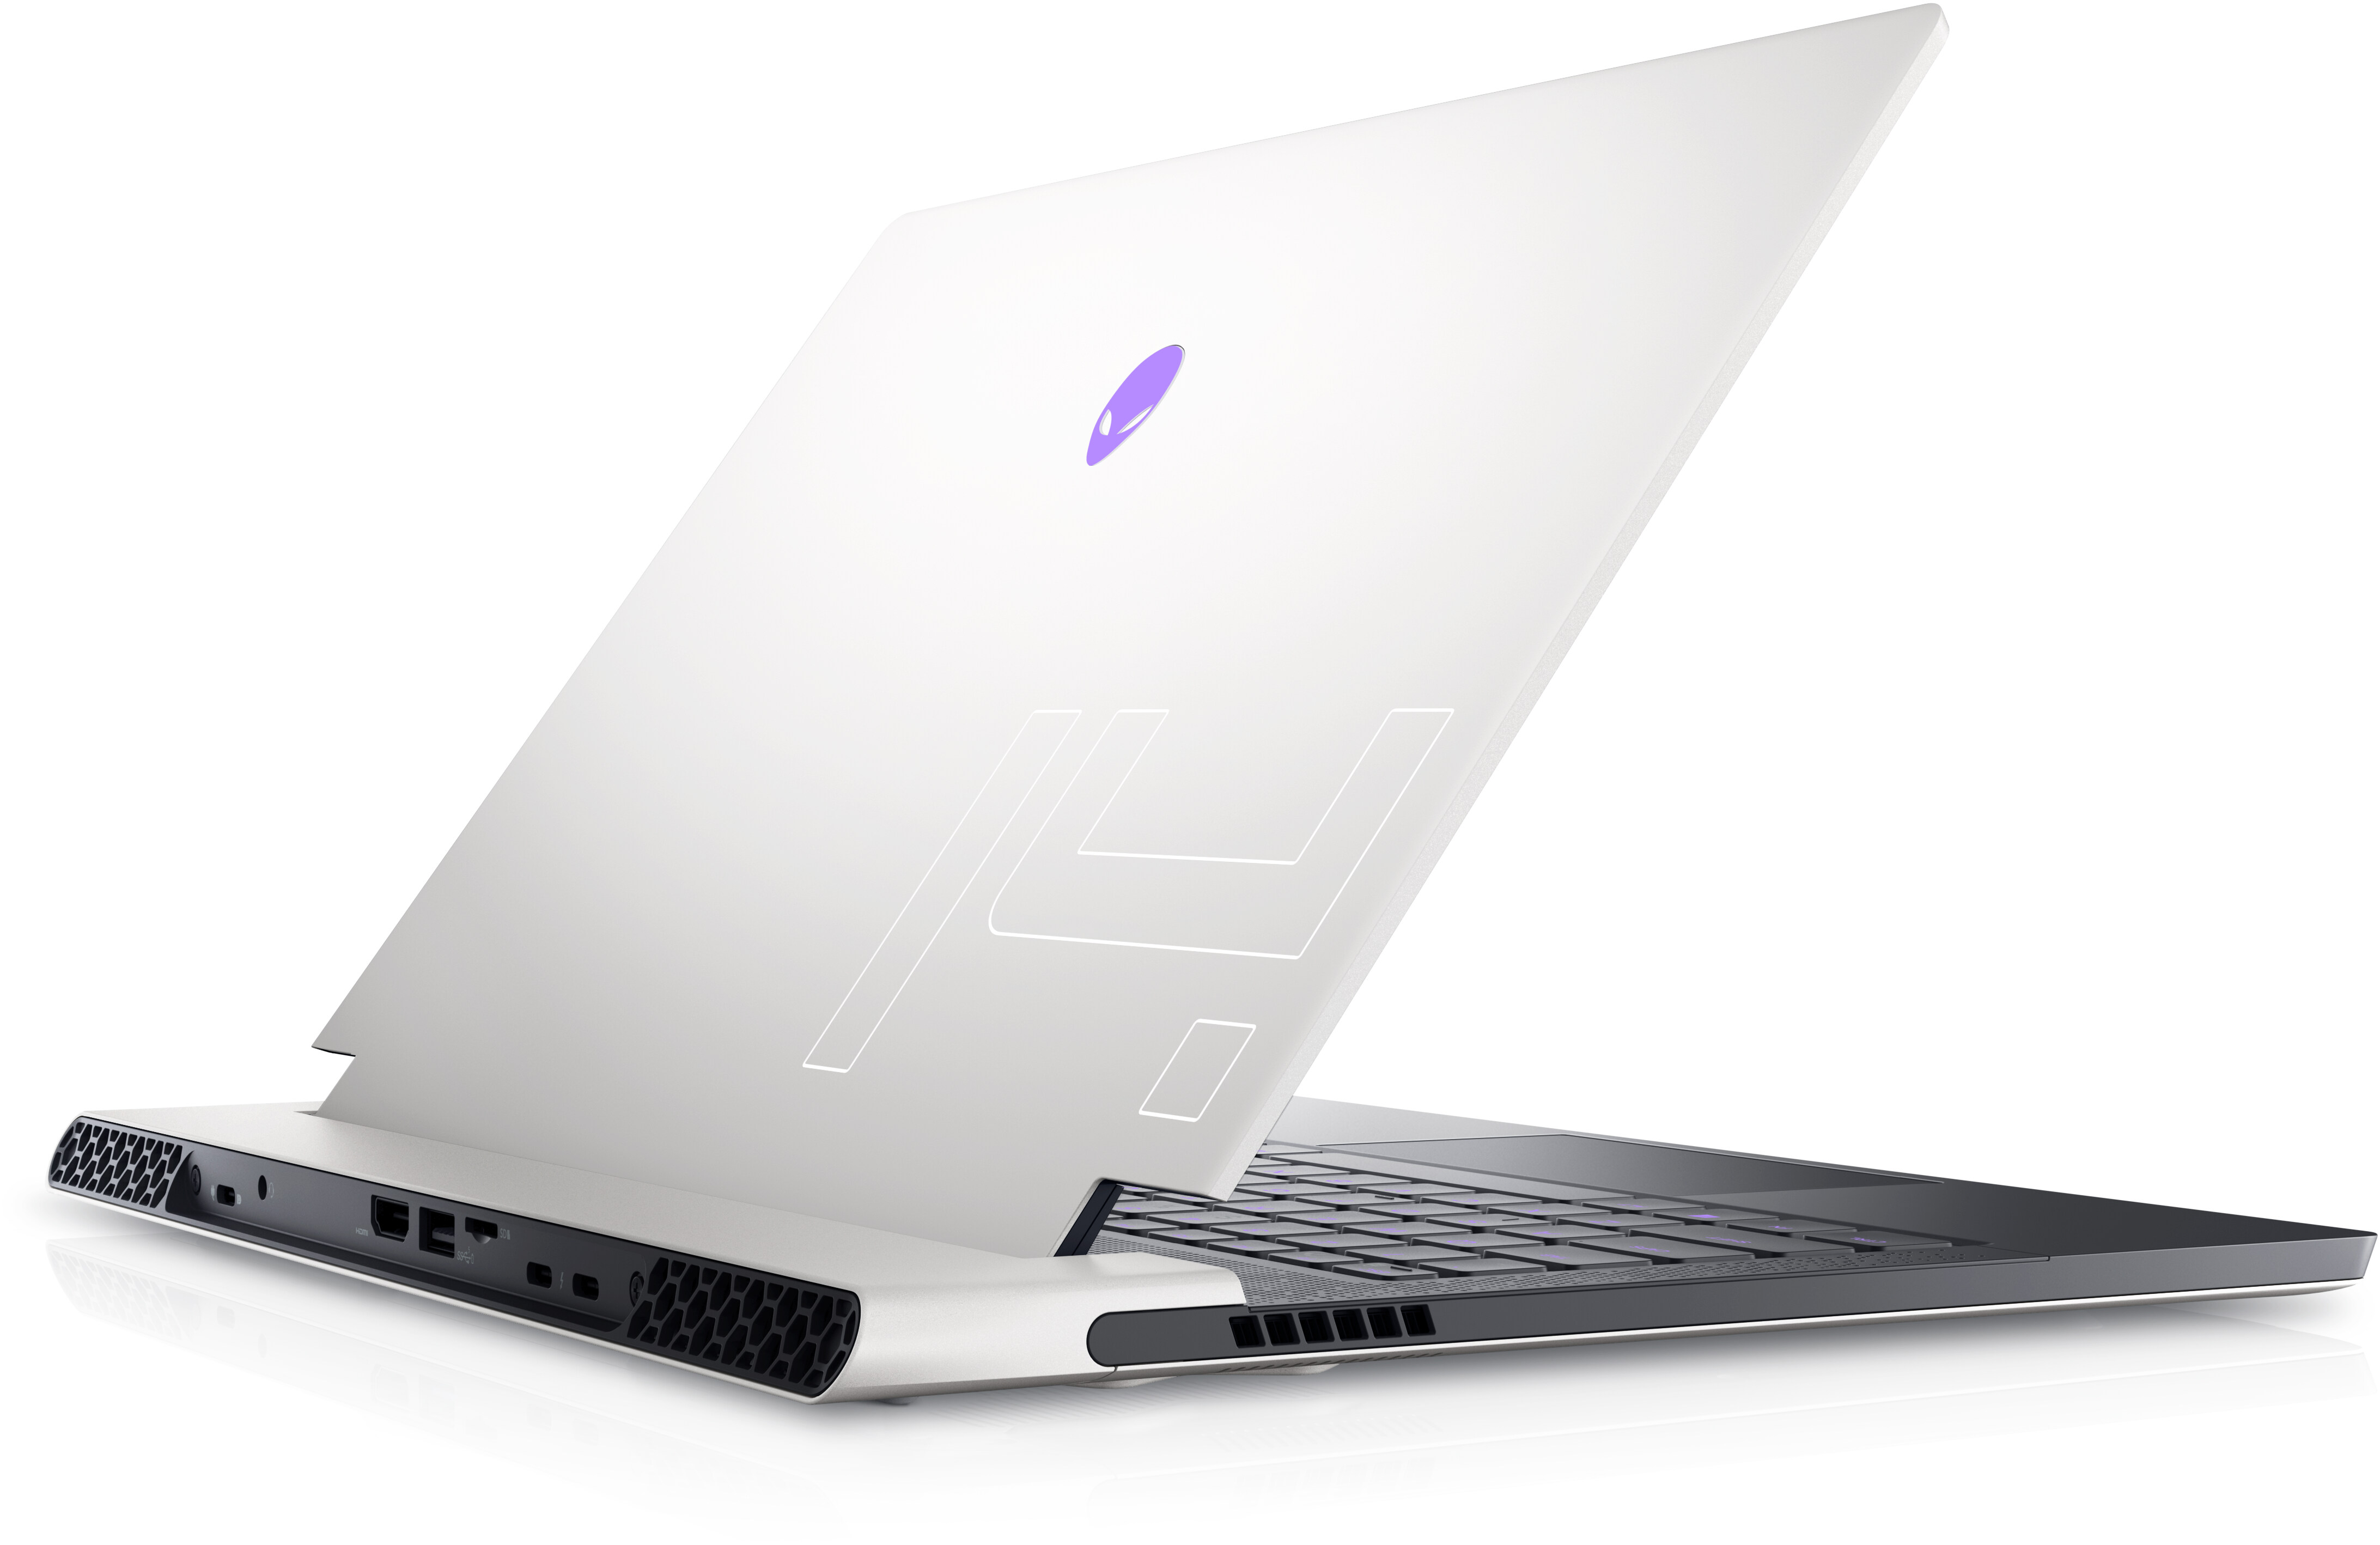 Alienware x14 Gaming Laptop | Dell USA